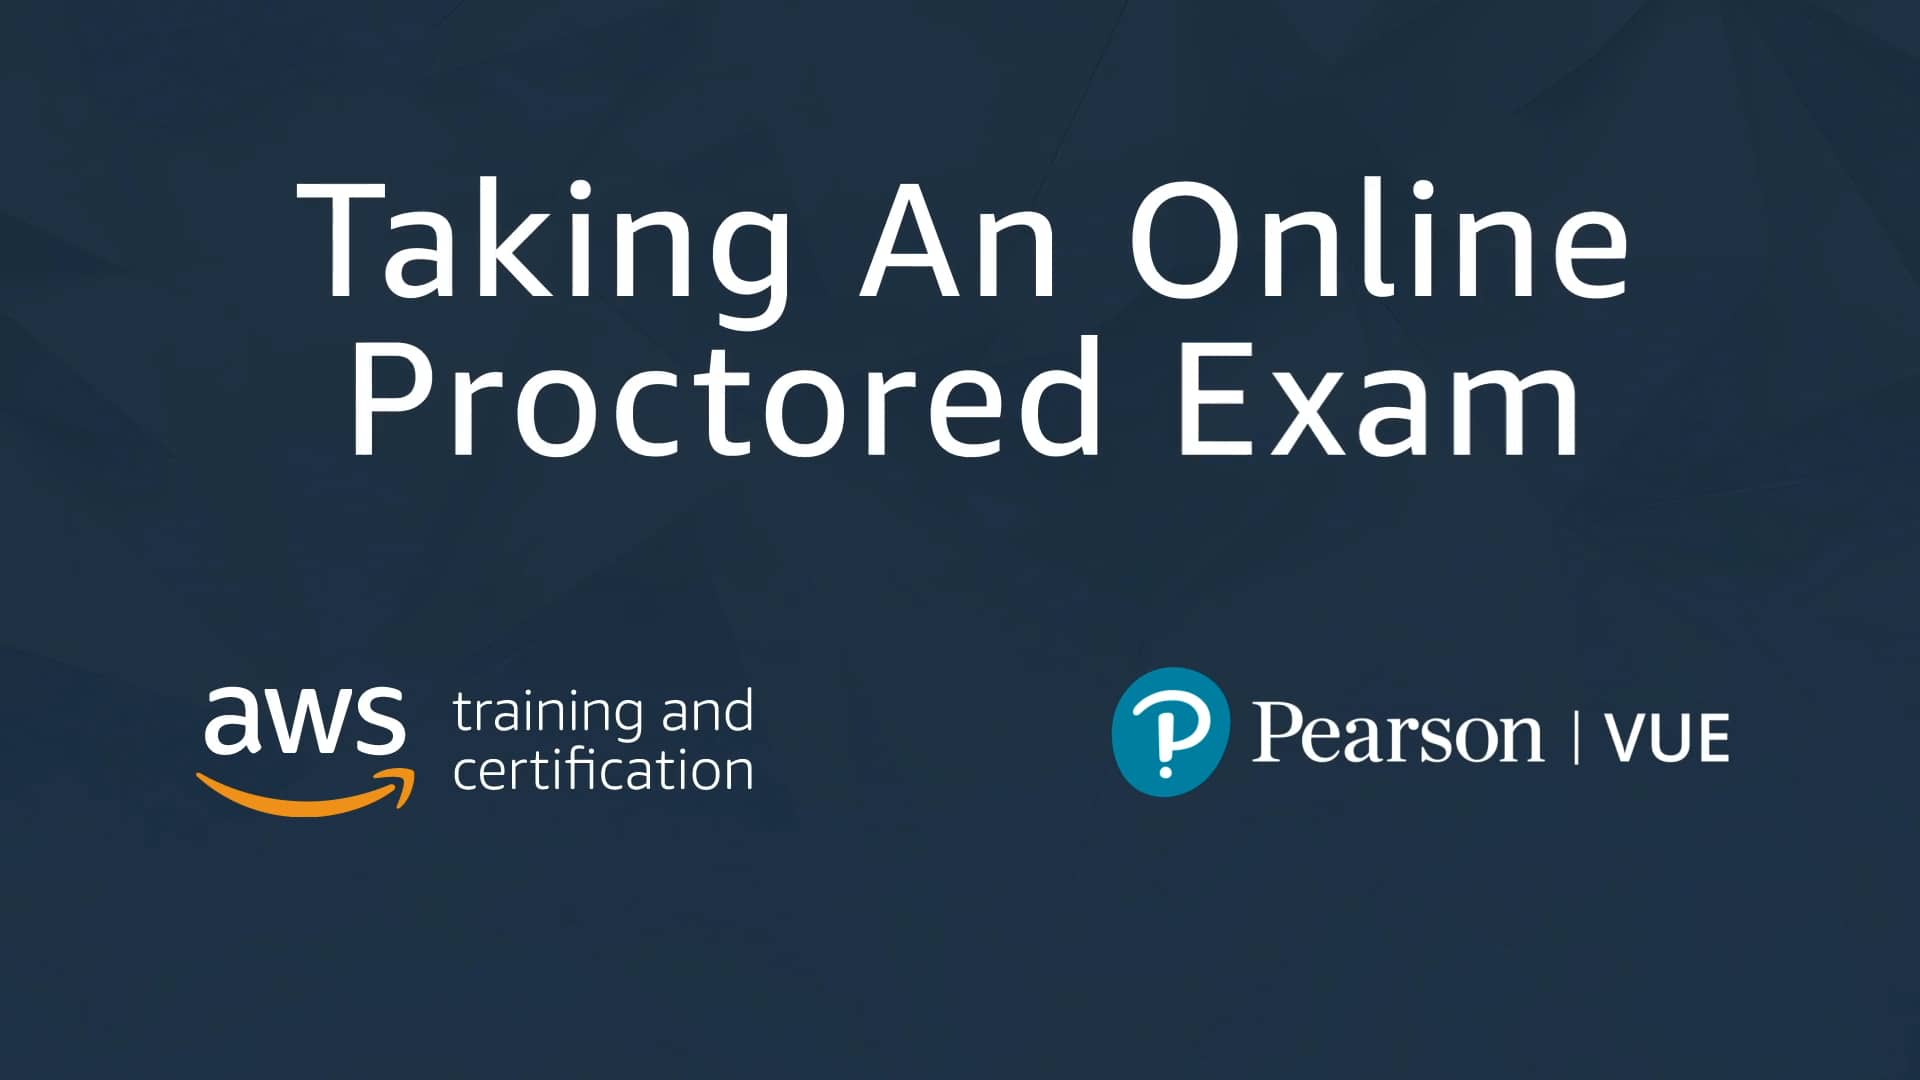 AWS certification testing from home with Pearson VUE online proctoring